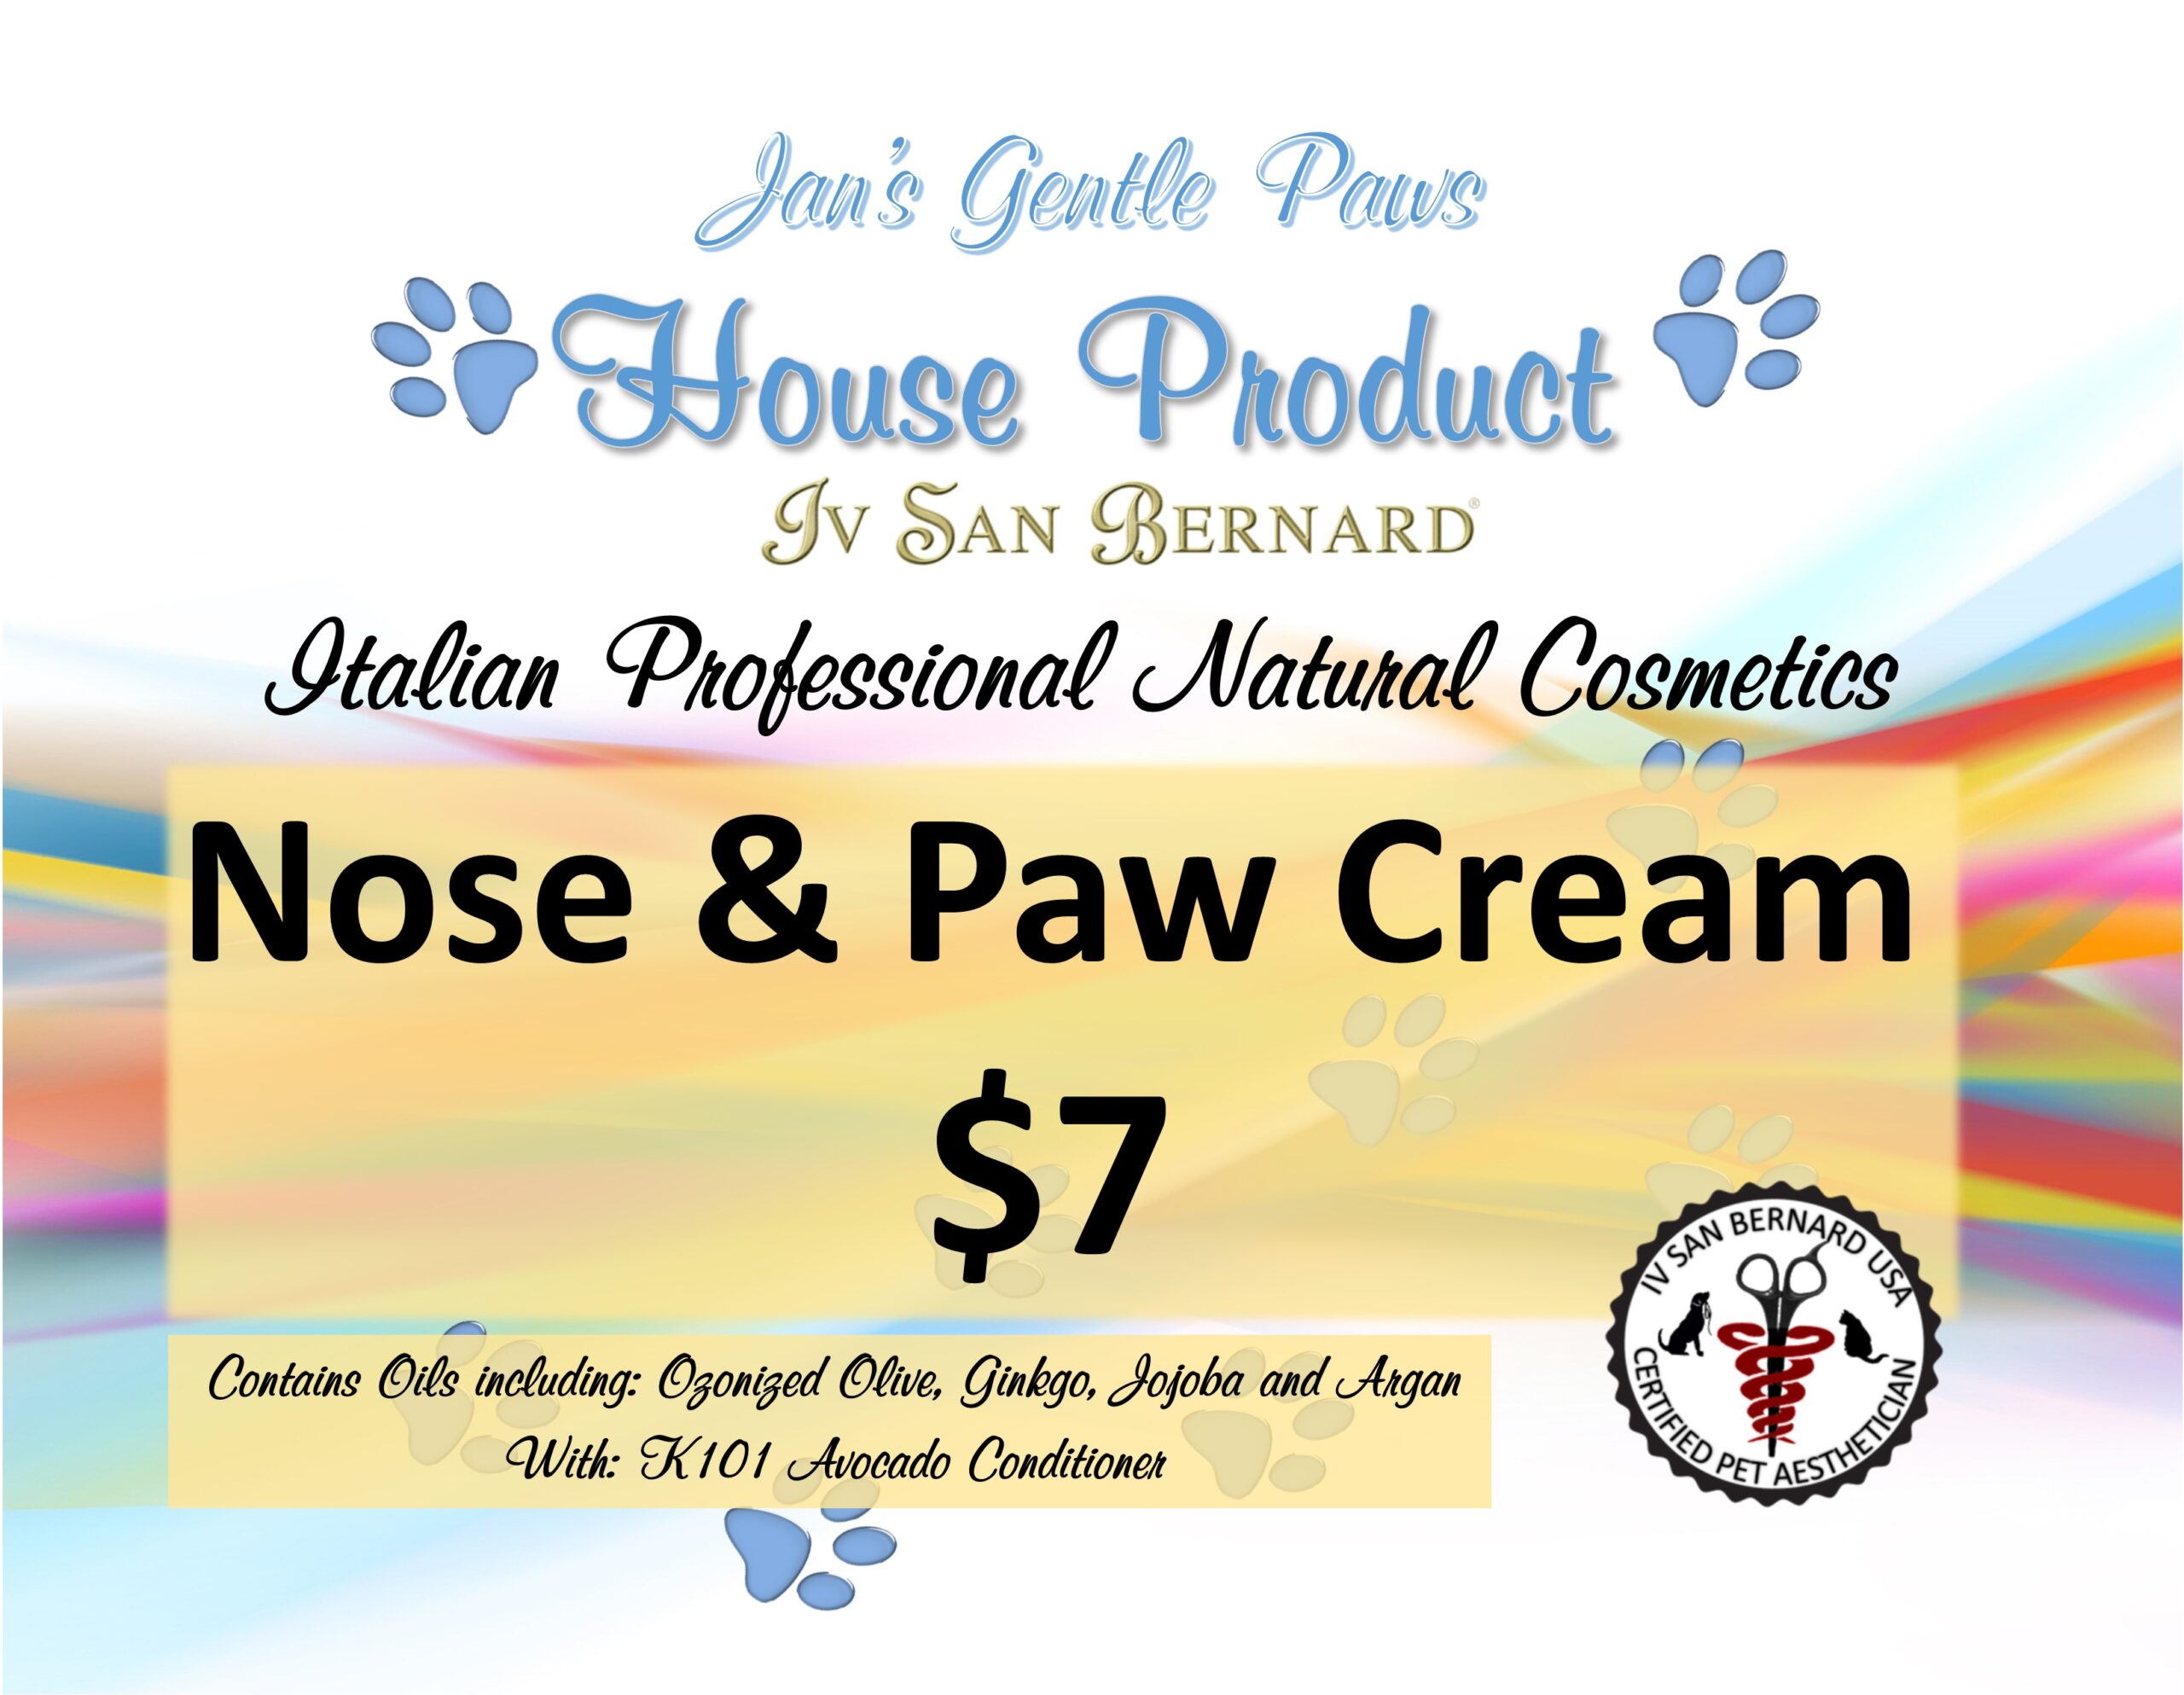 JGP Nose and Paw Cream Sign 2